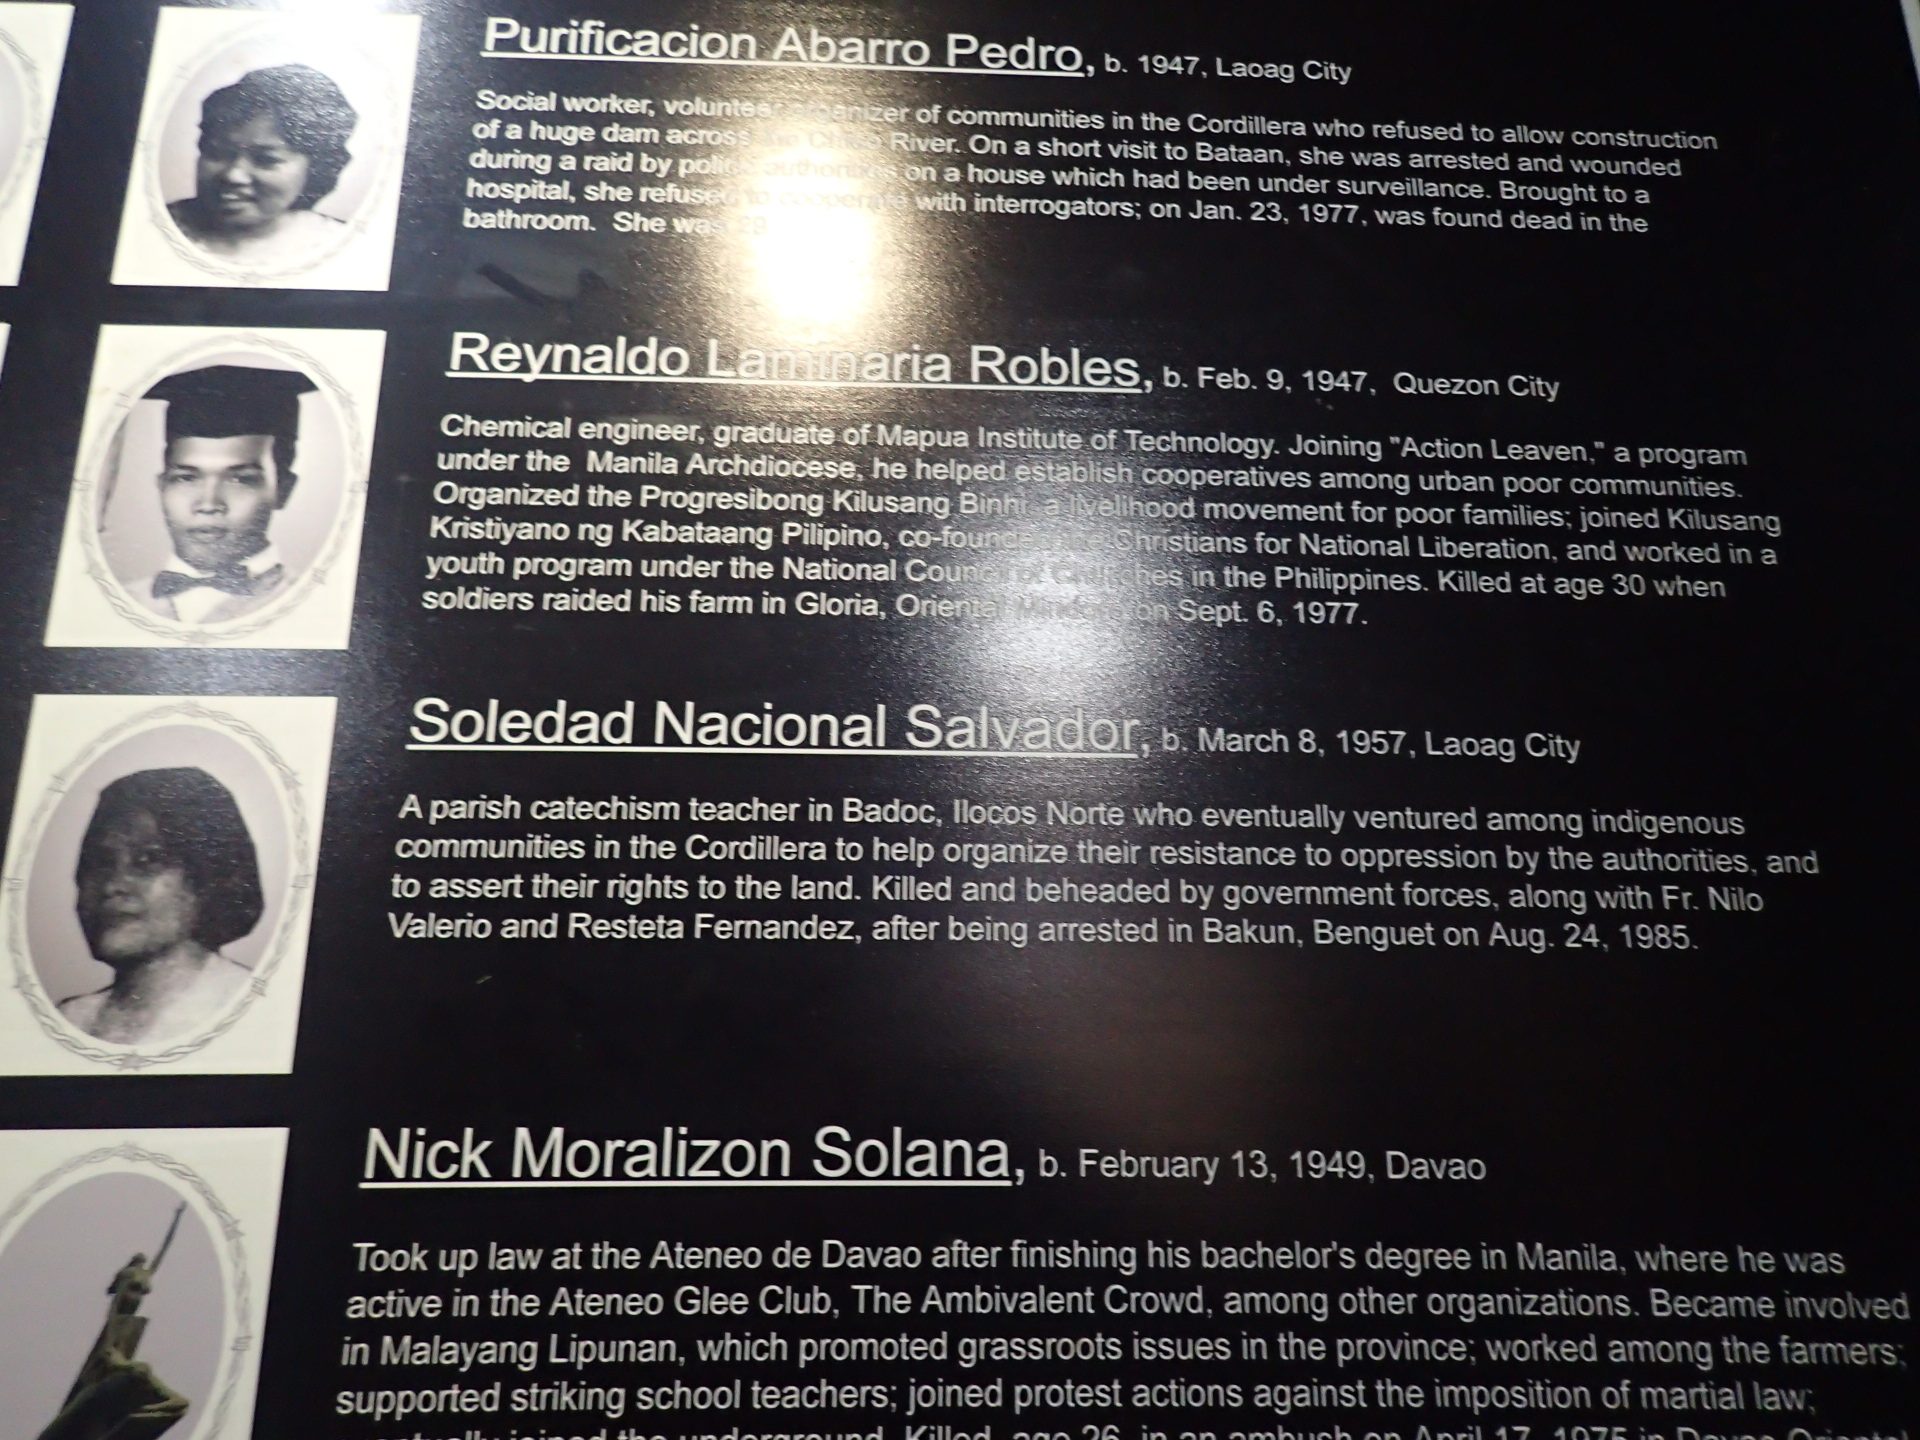 ILOCANO HEROES. Fellow Ilocanos rose up against Marcos' rule, too. Purificacion Pedro and Soledad Salvador are just a few of them. They fought for indigenous people's rights to their land.  